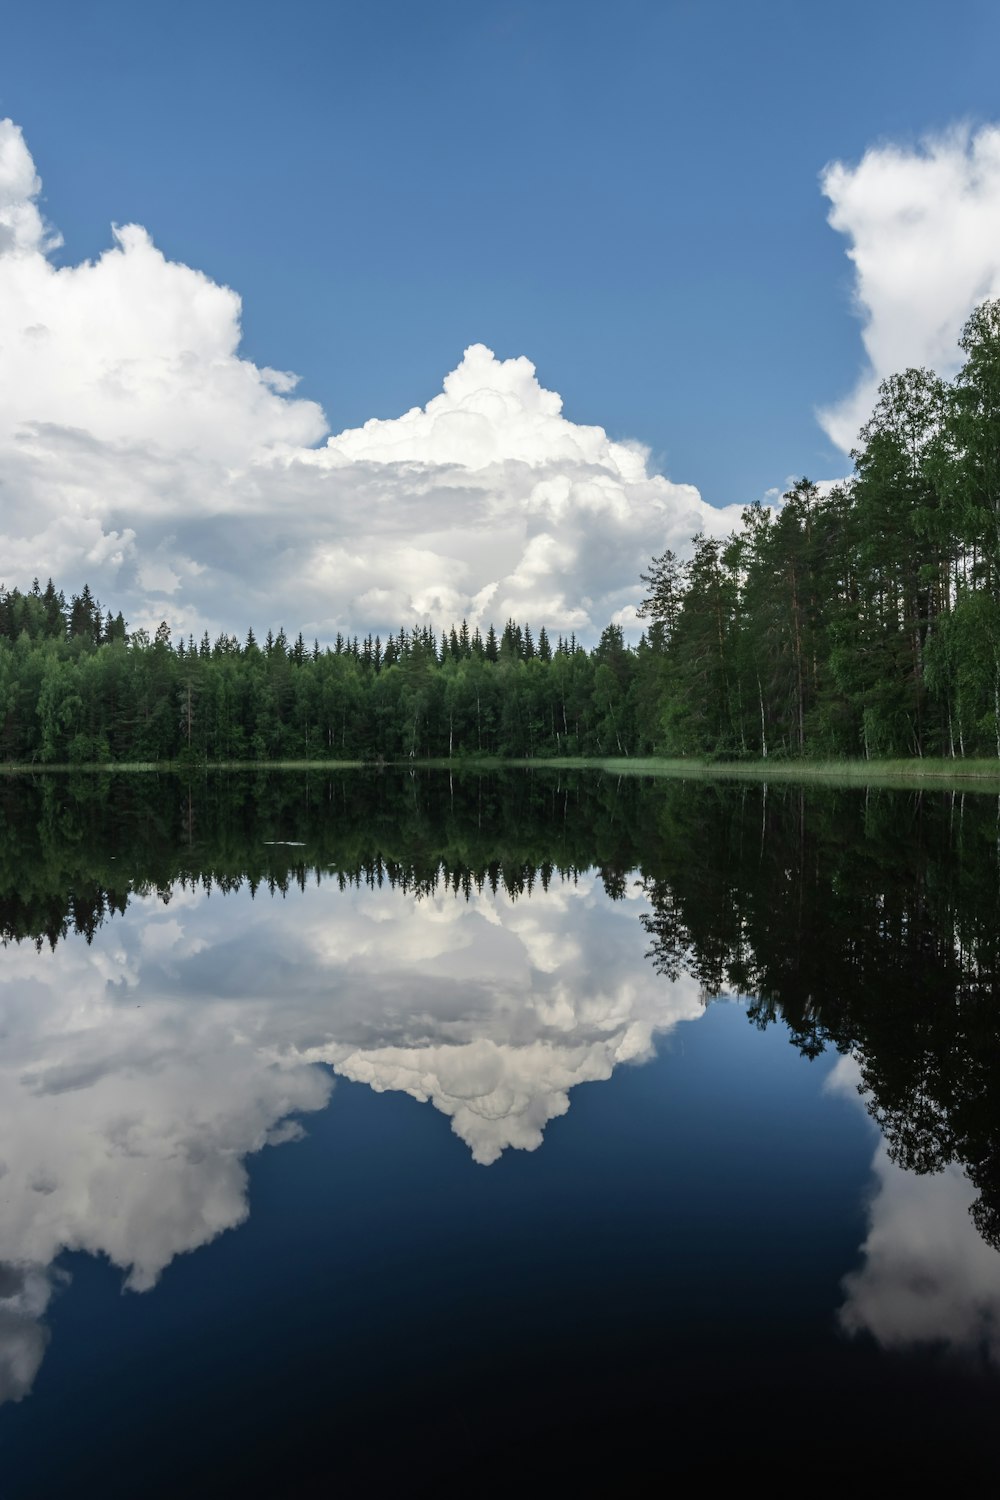 a lake surrounded by a forest under a cloudy sky